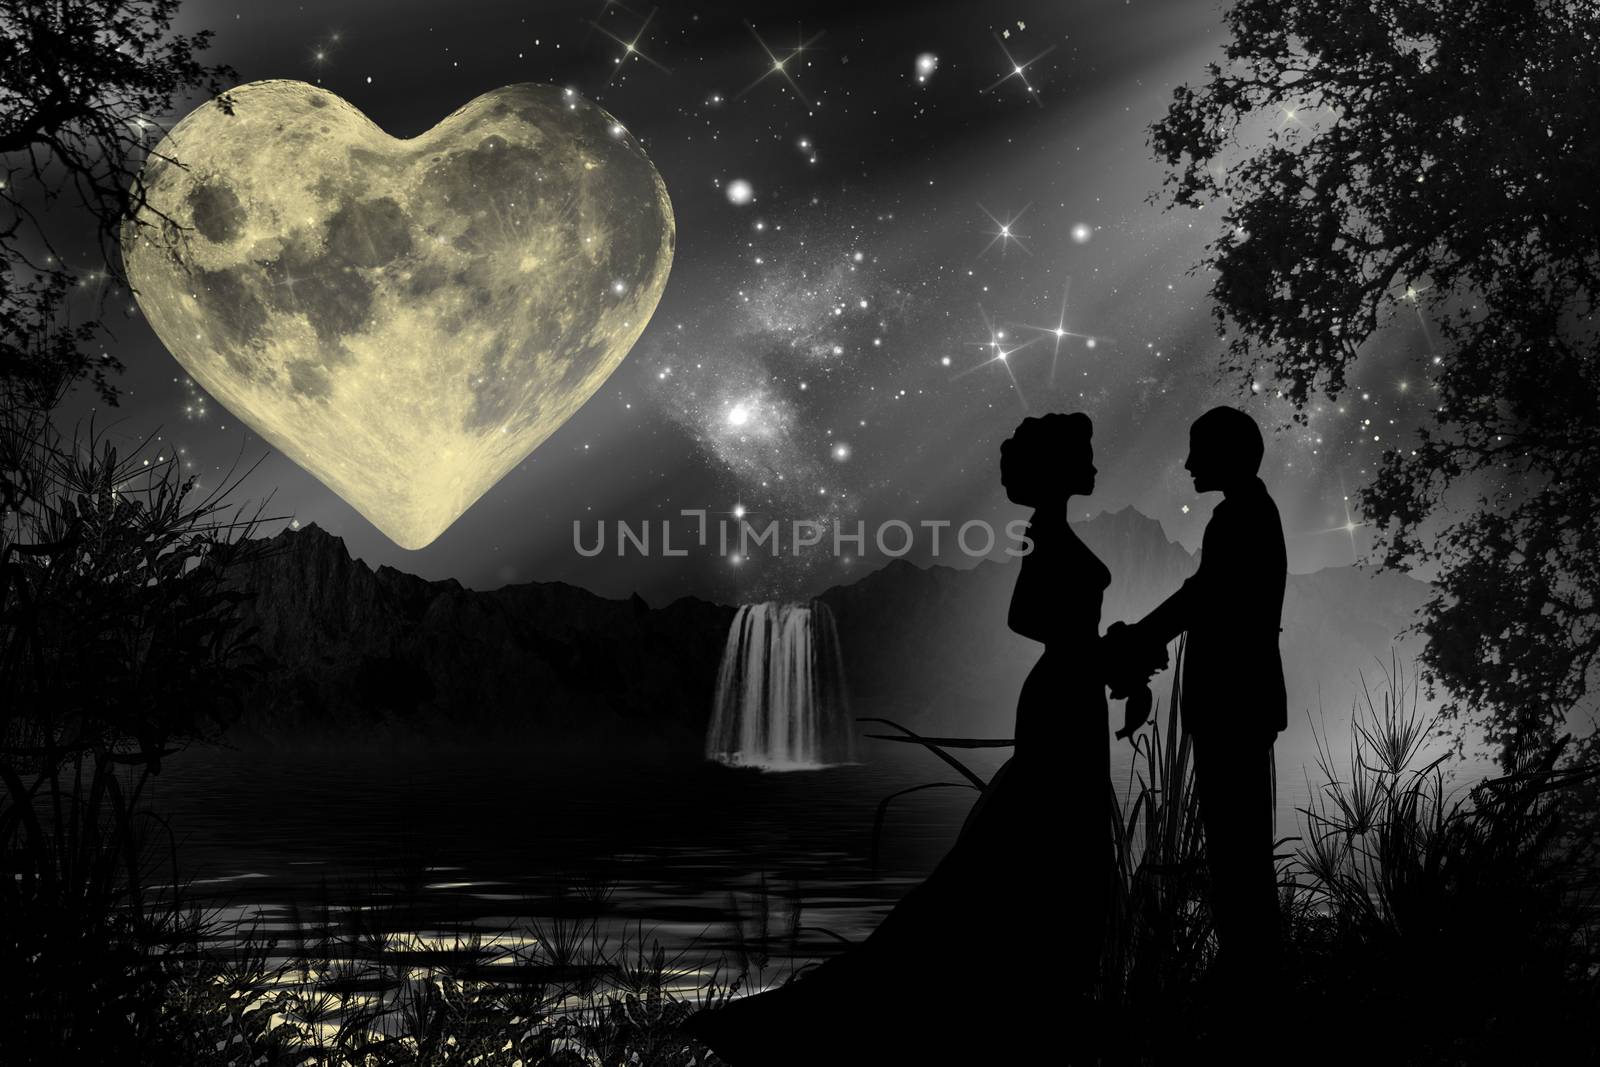 Valentine romantic atmosphere with heart shaped moon and a silhouette of a couple holding hands